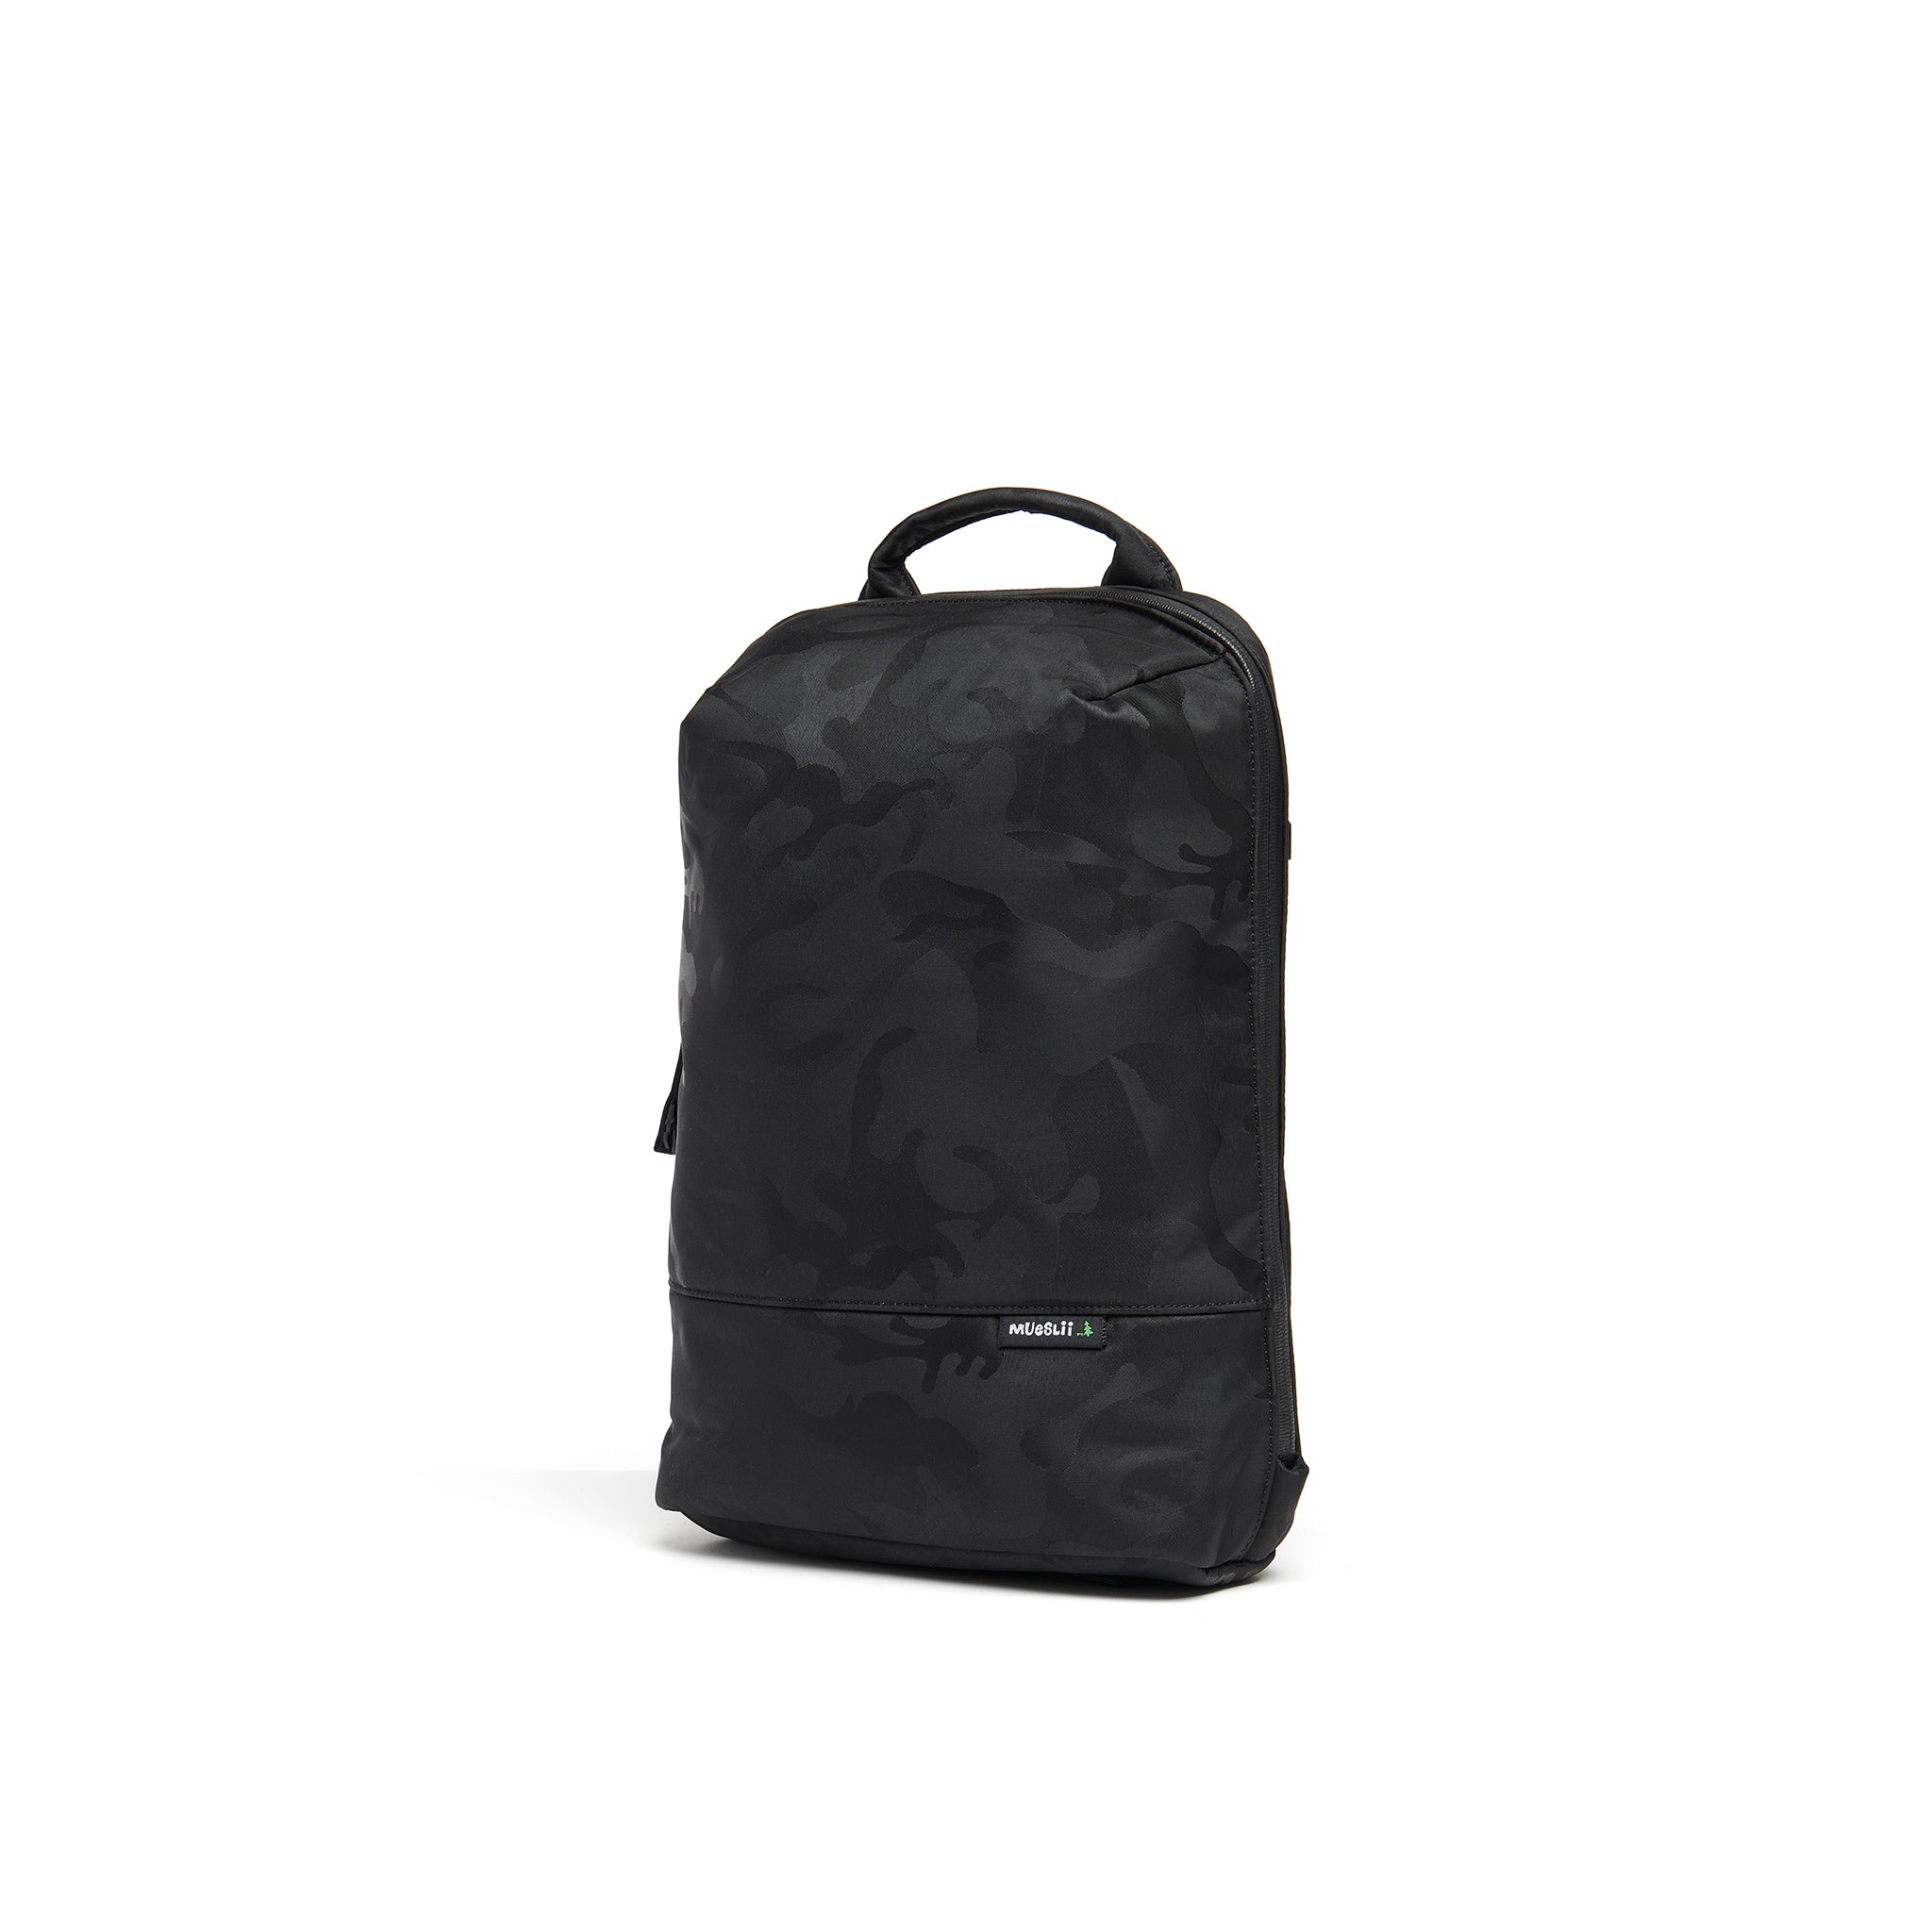 Mueslii small backpack, made of jacquard  waterproof nylon, camouflage pattern, with a laptop compartment, color black, side view.